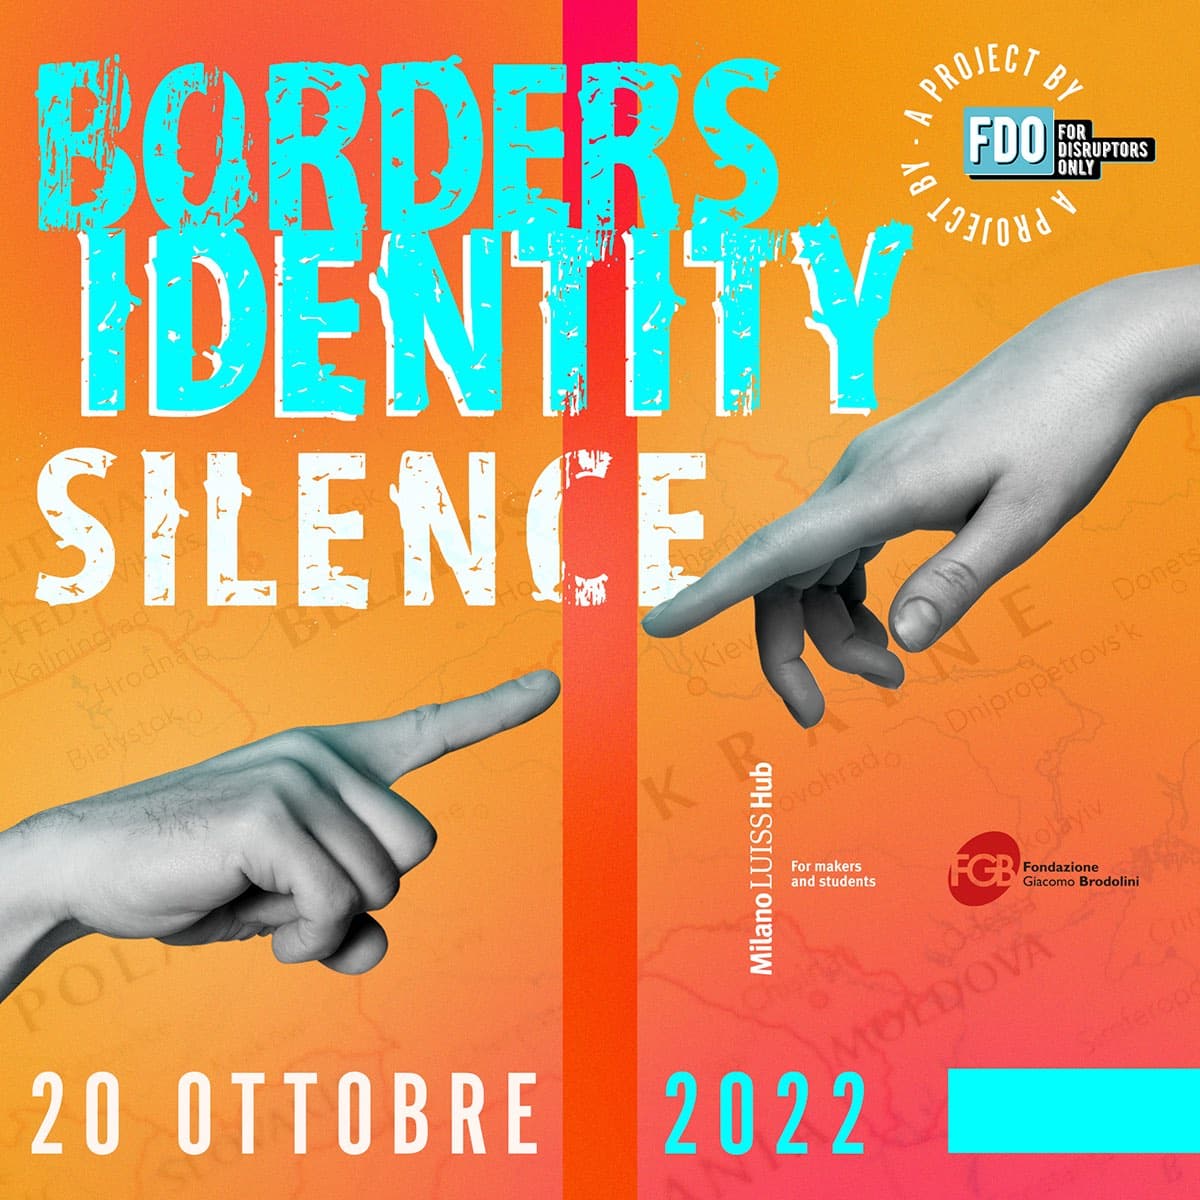 borders identity silence gens dys fdo for disruptors only milano luiss hub